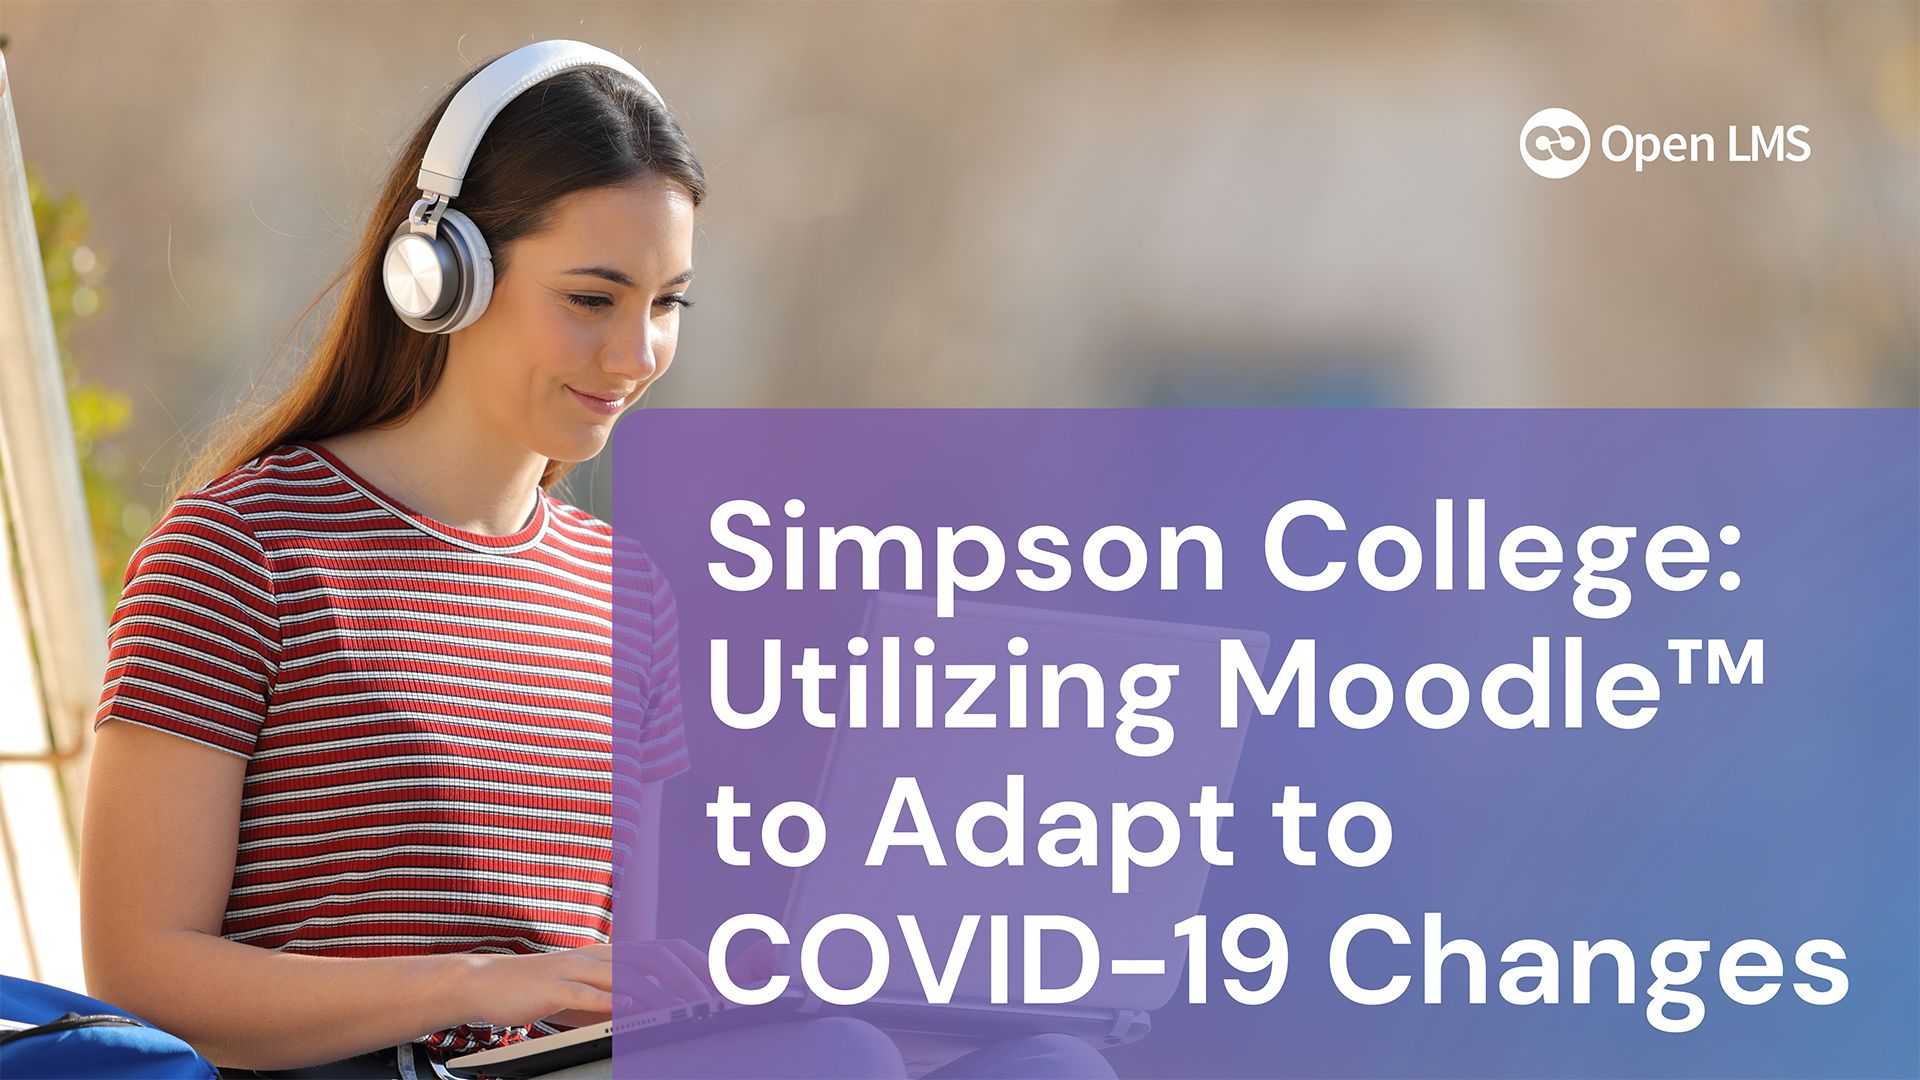 Simpson College: Utilizing Moodle™ to Adapt to COVID-19 Changes